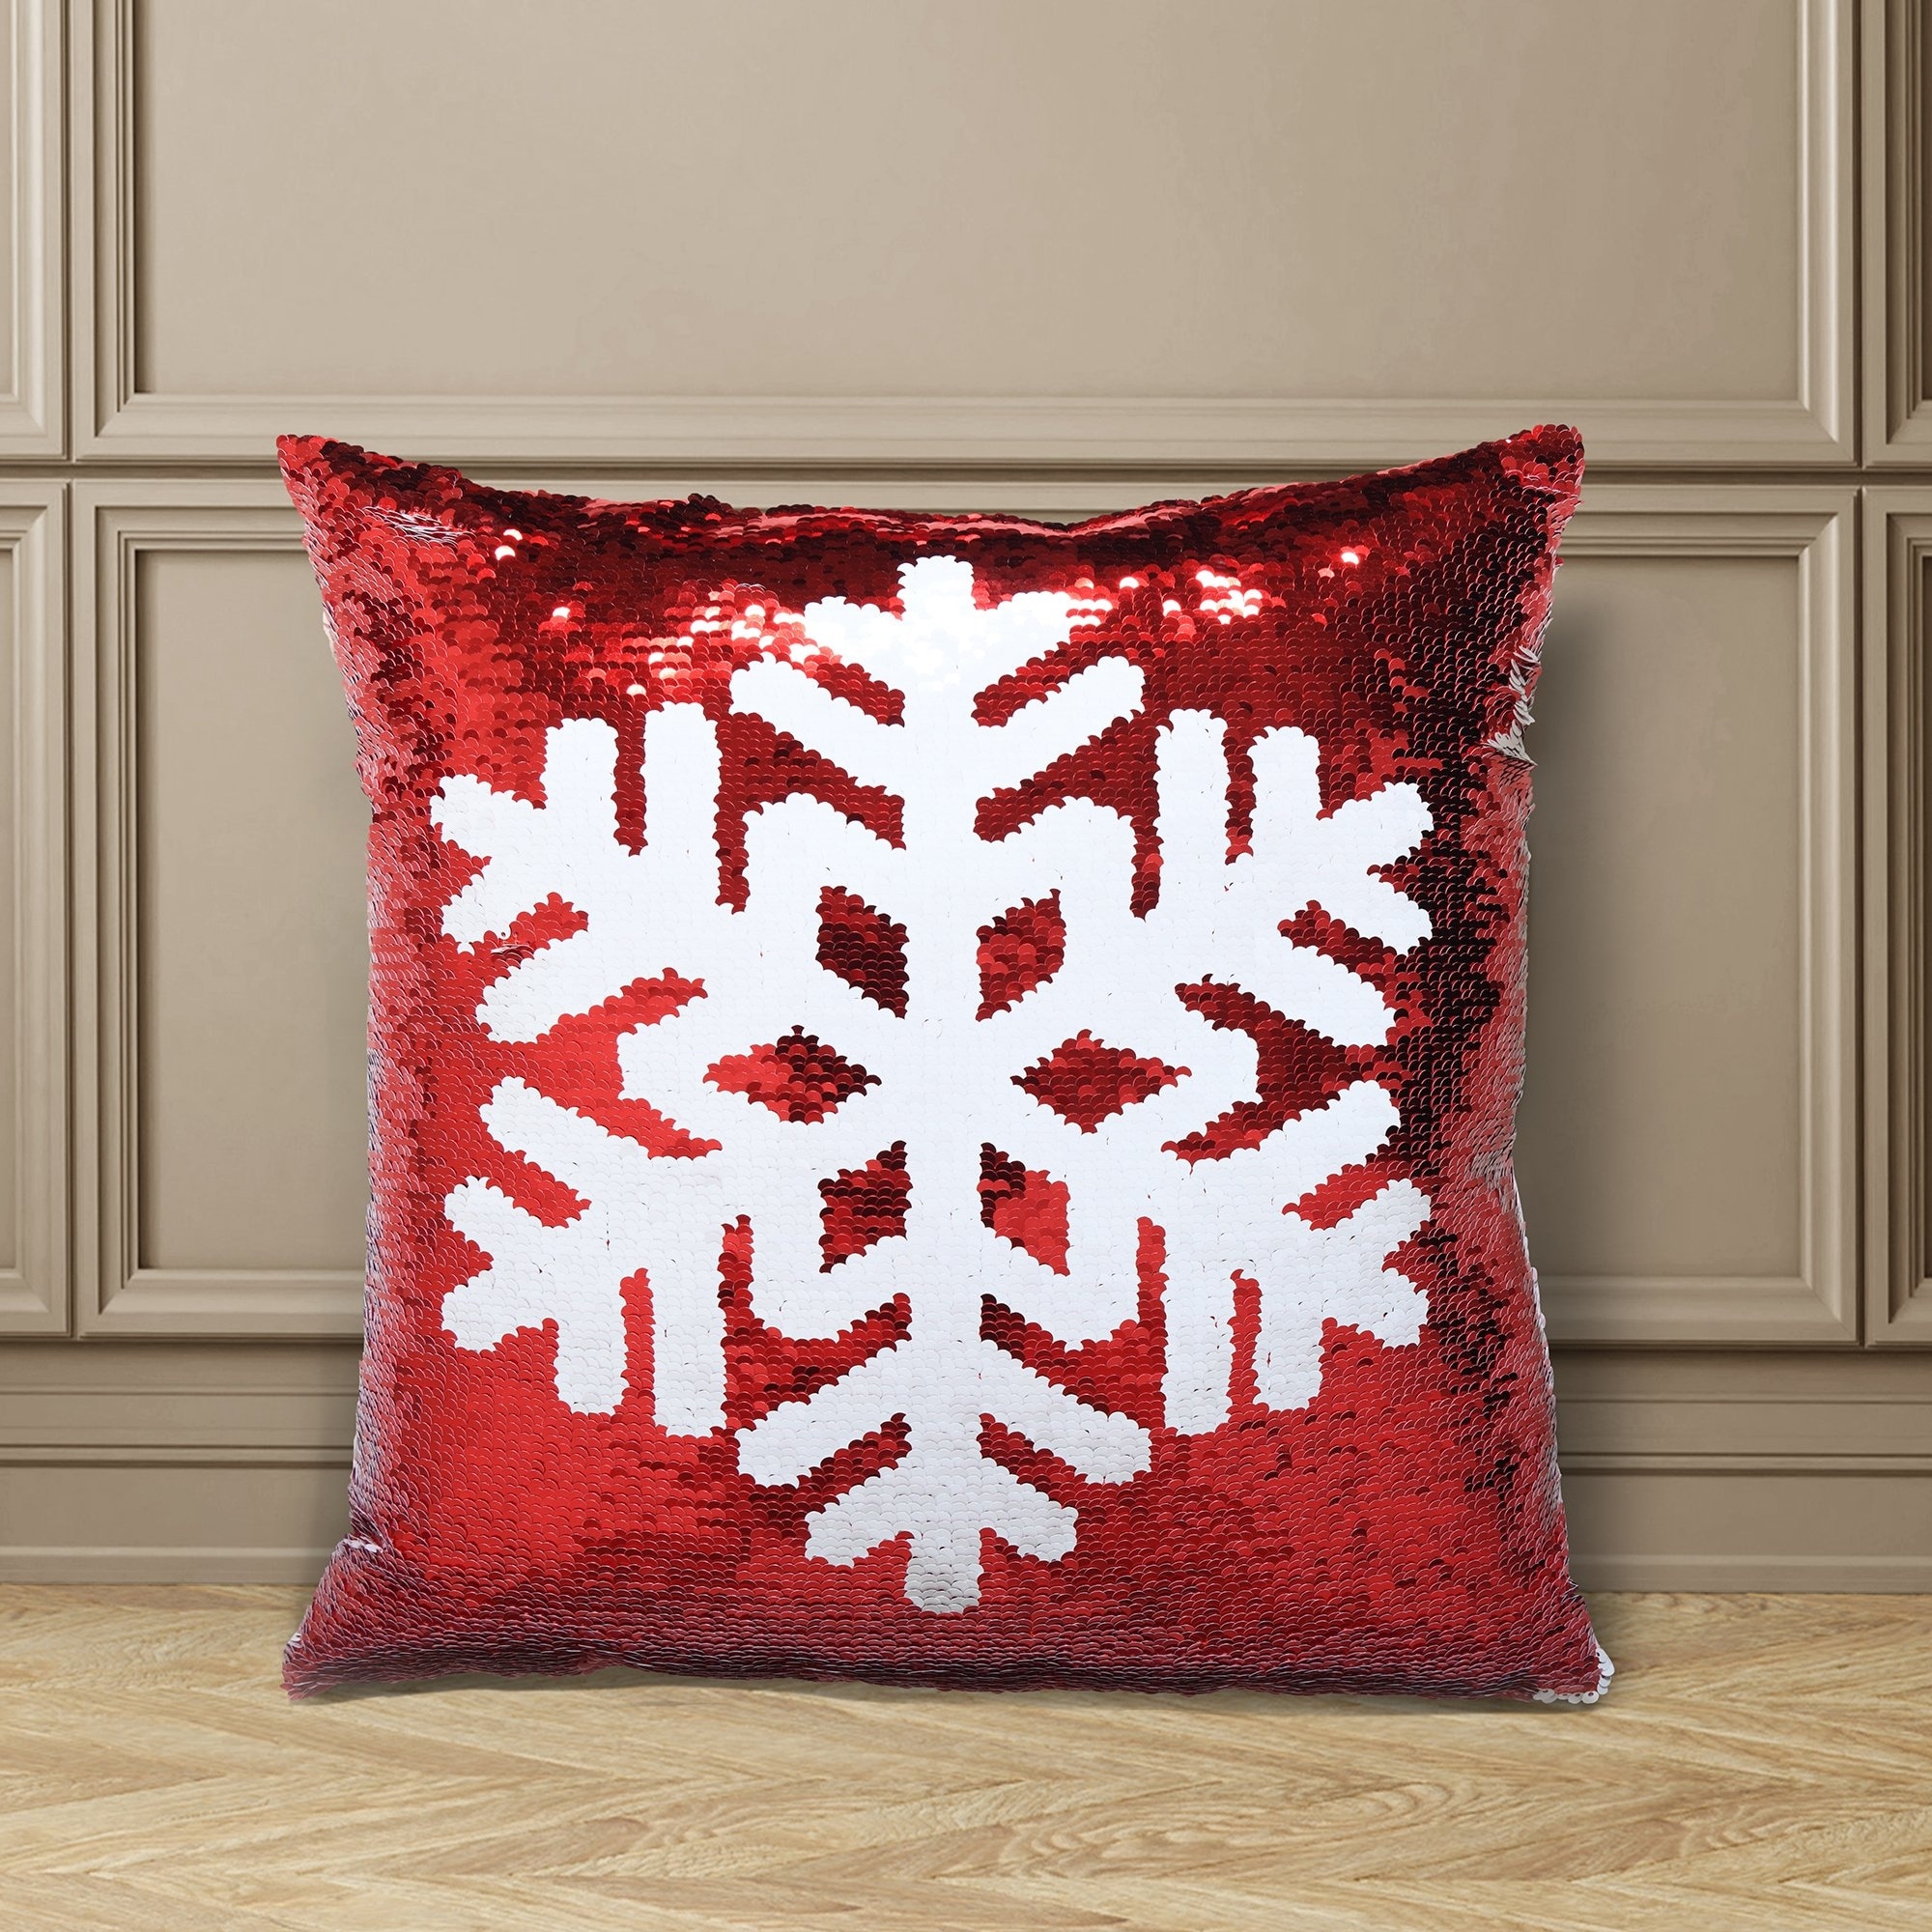 https://ak1.ostkcdn.com/images/products/is/images/direct/8f2e6fd2d8b2896721904268774f8113cd959066/Snowflake-Christmas-Pillow.jpg